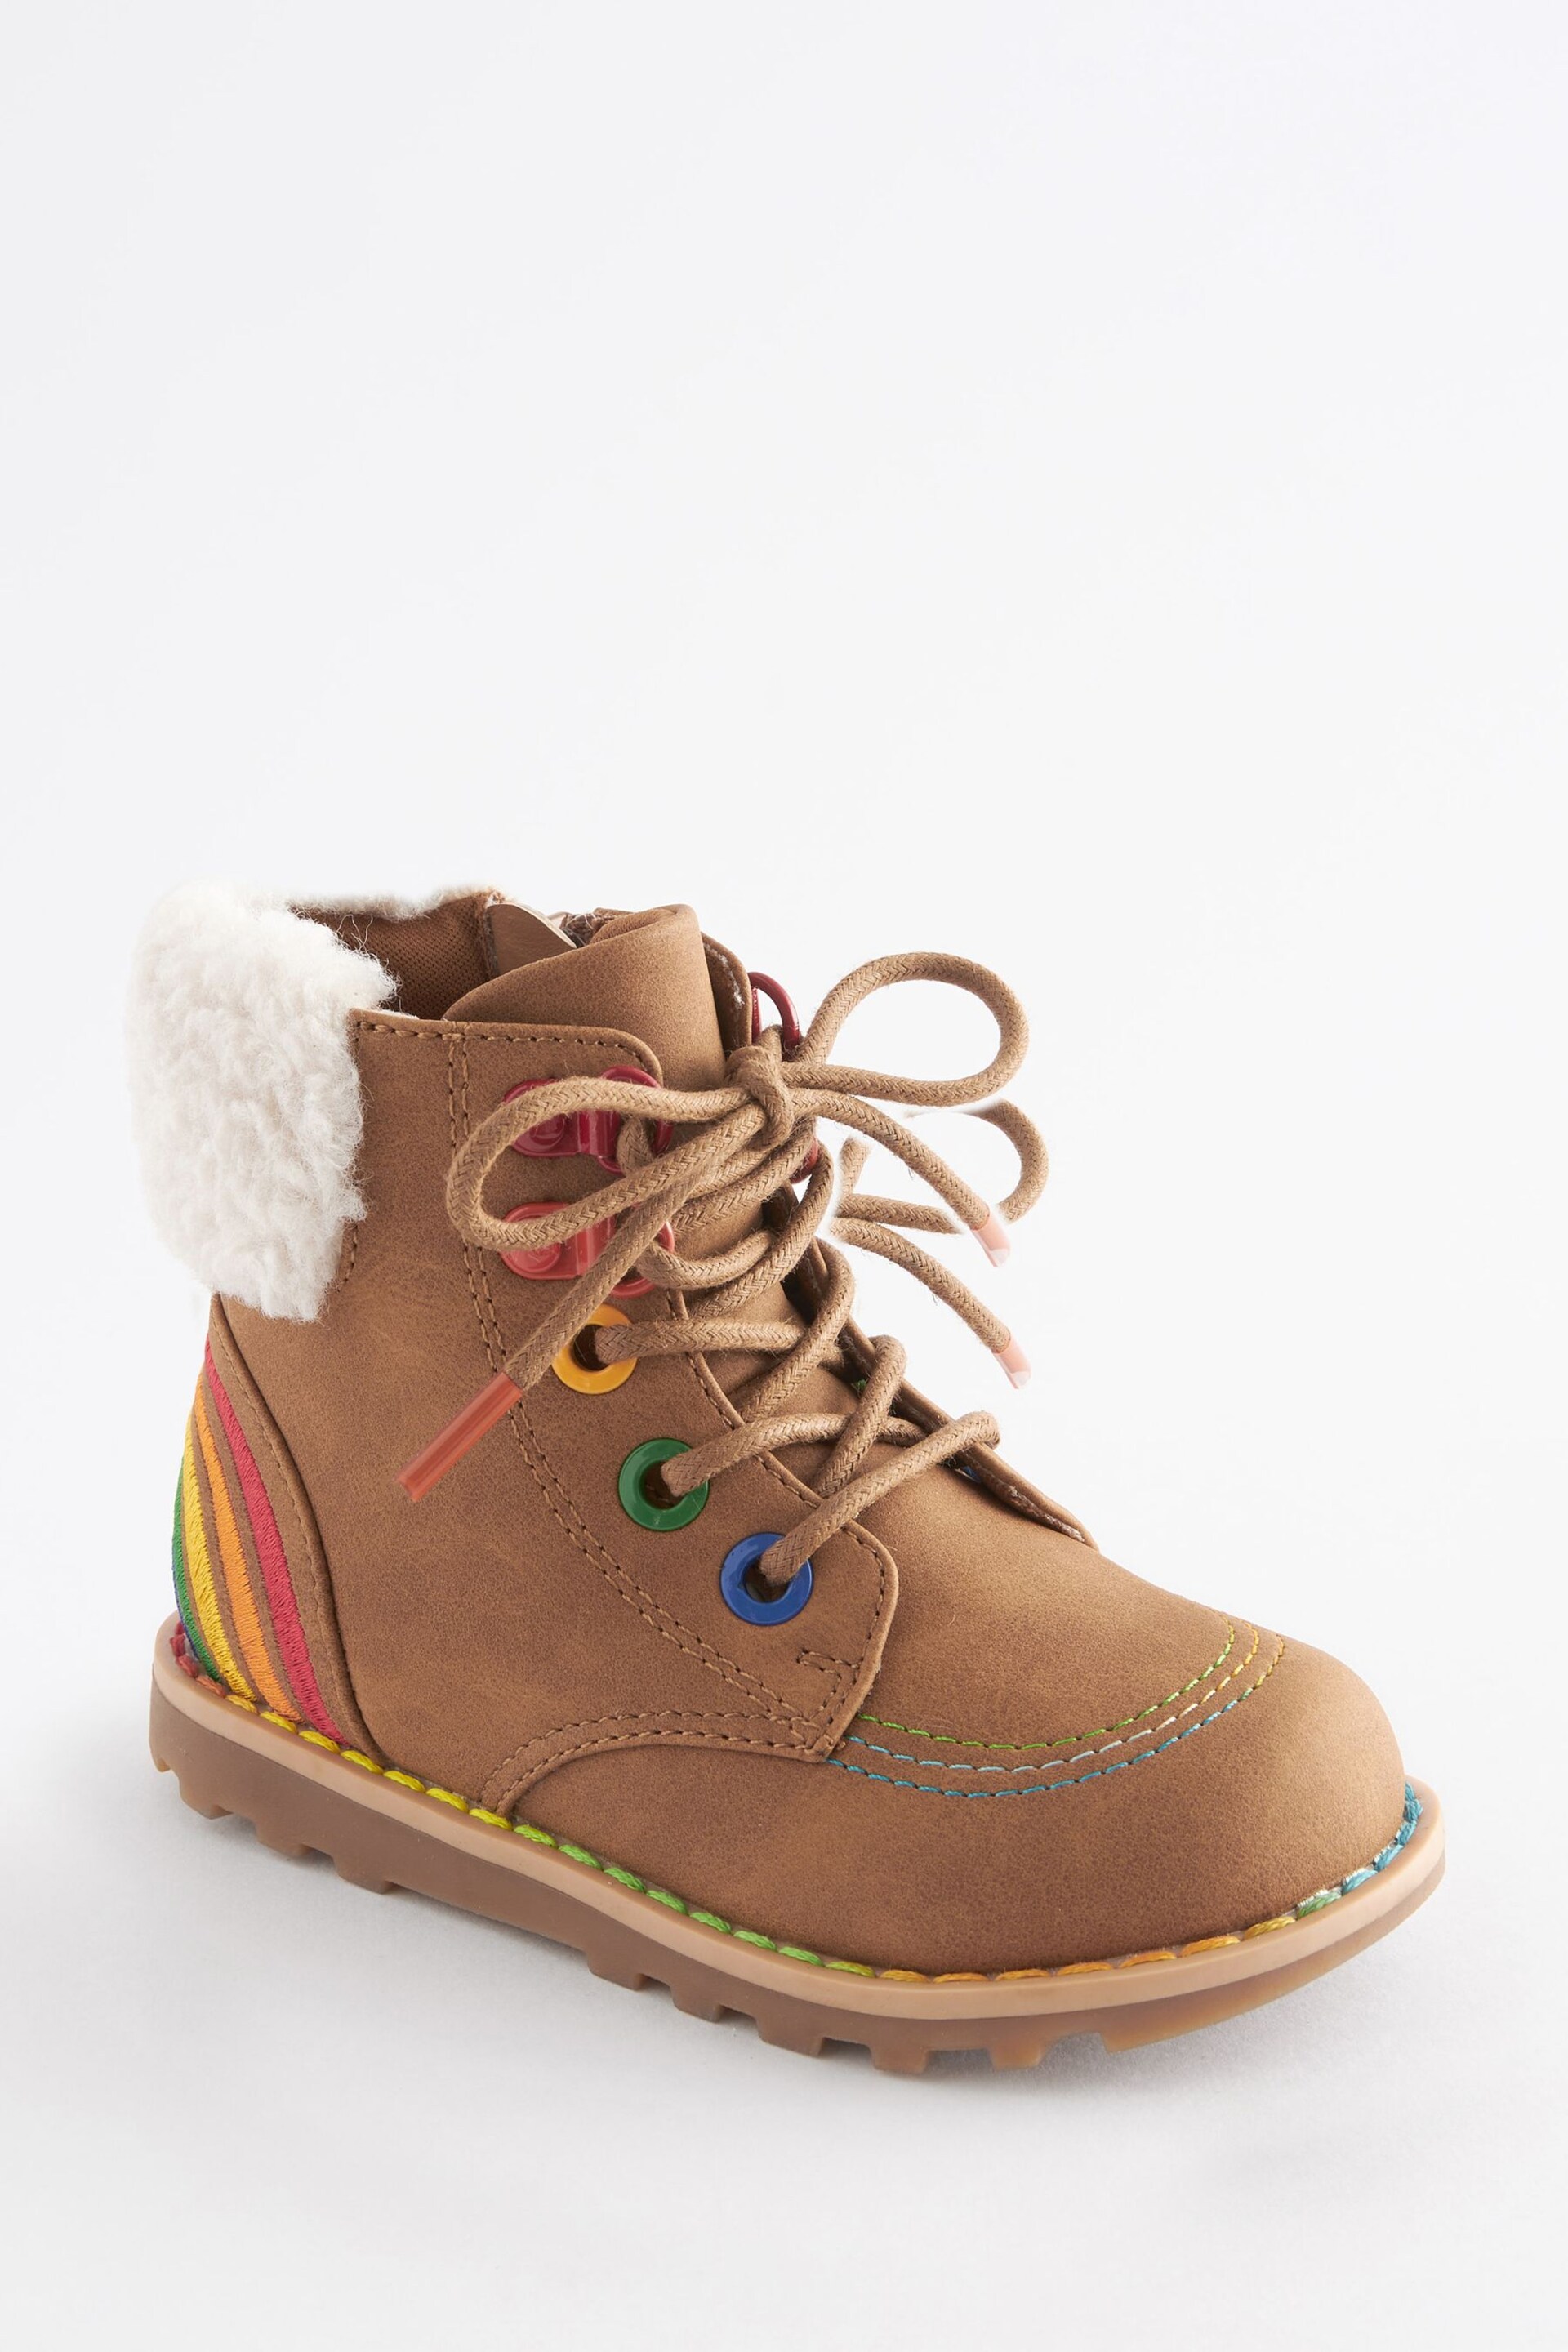 Little Bird by Jools Oliver Tan Brown Rainbow Lace Up Boots - Image 1 of 5